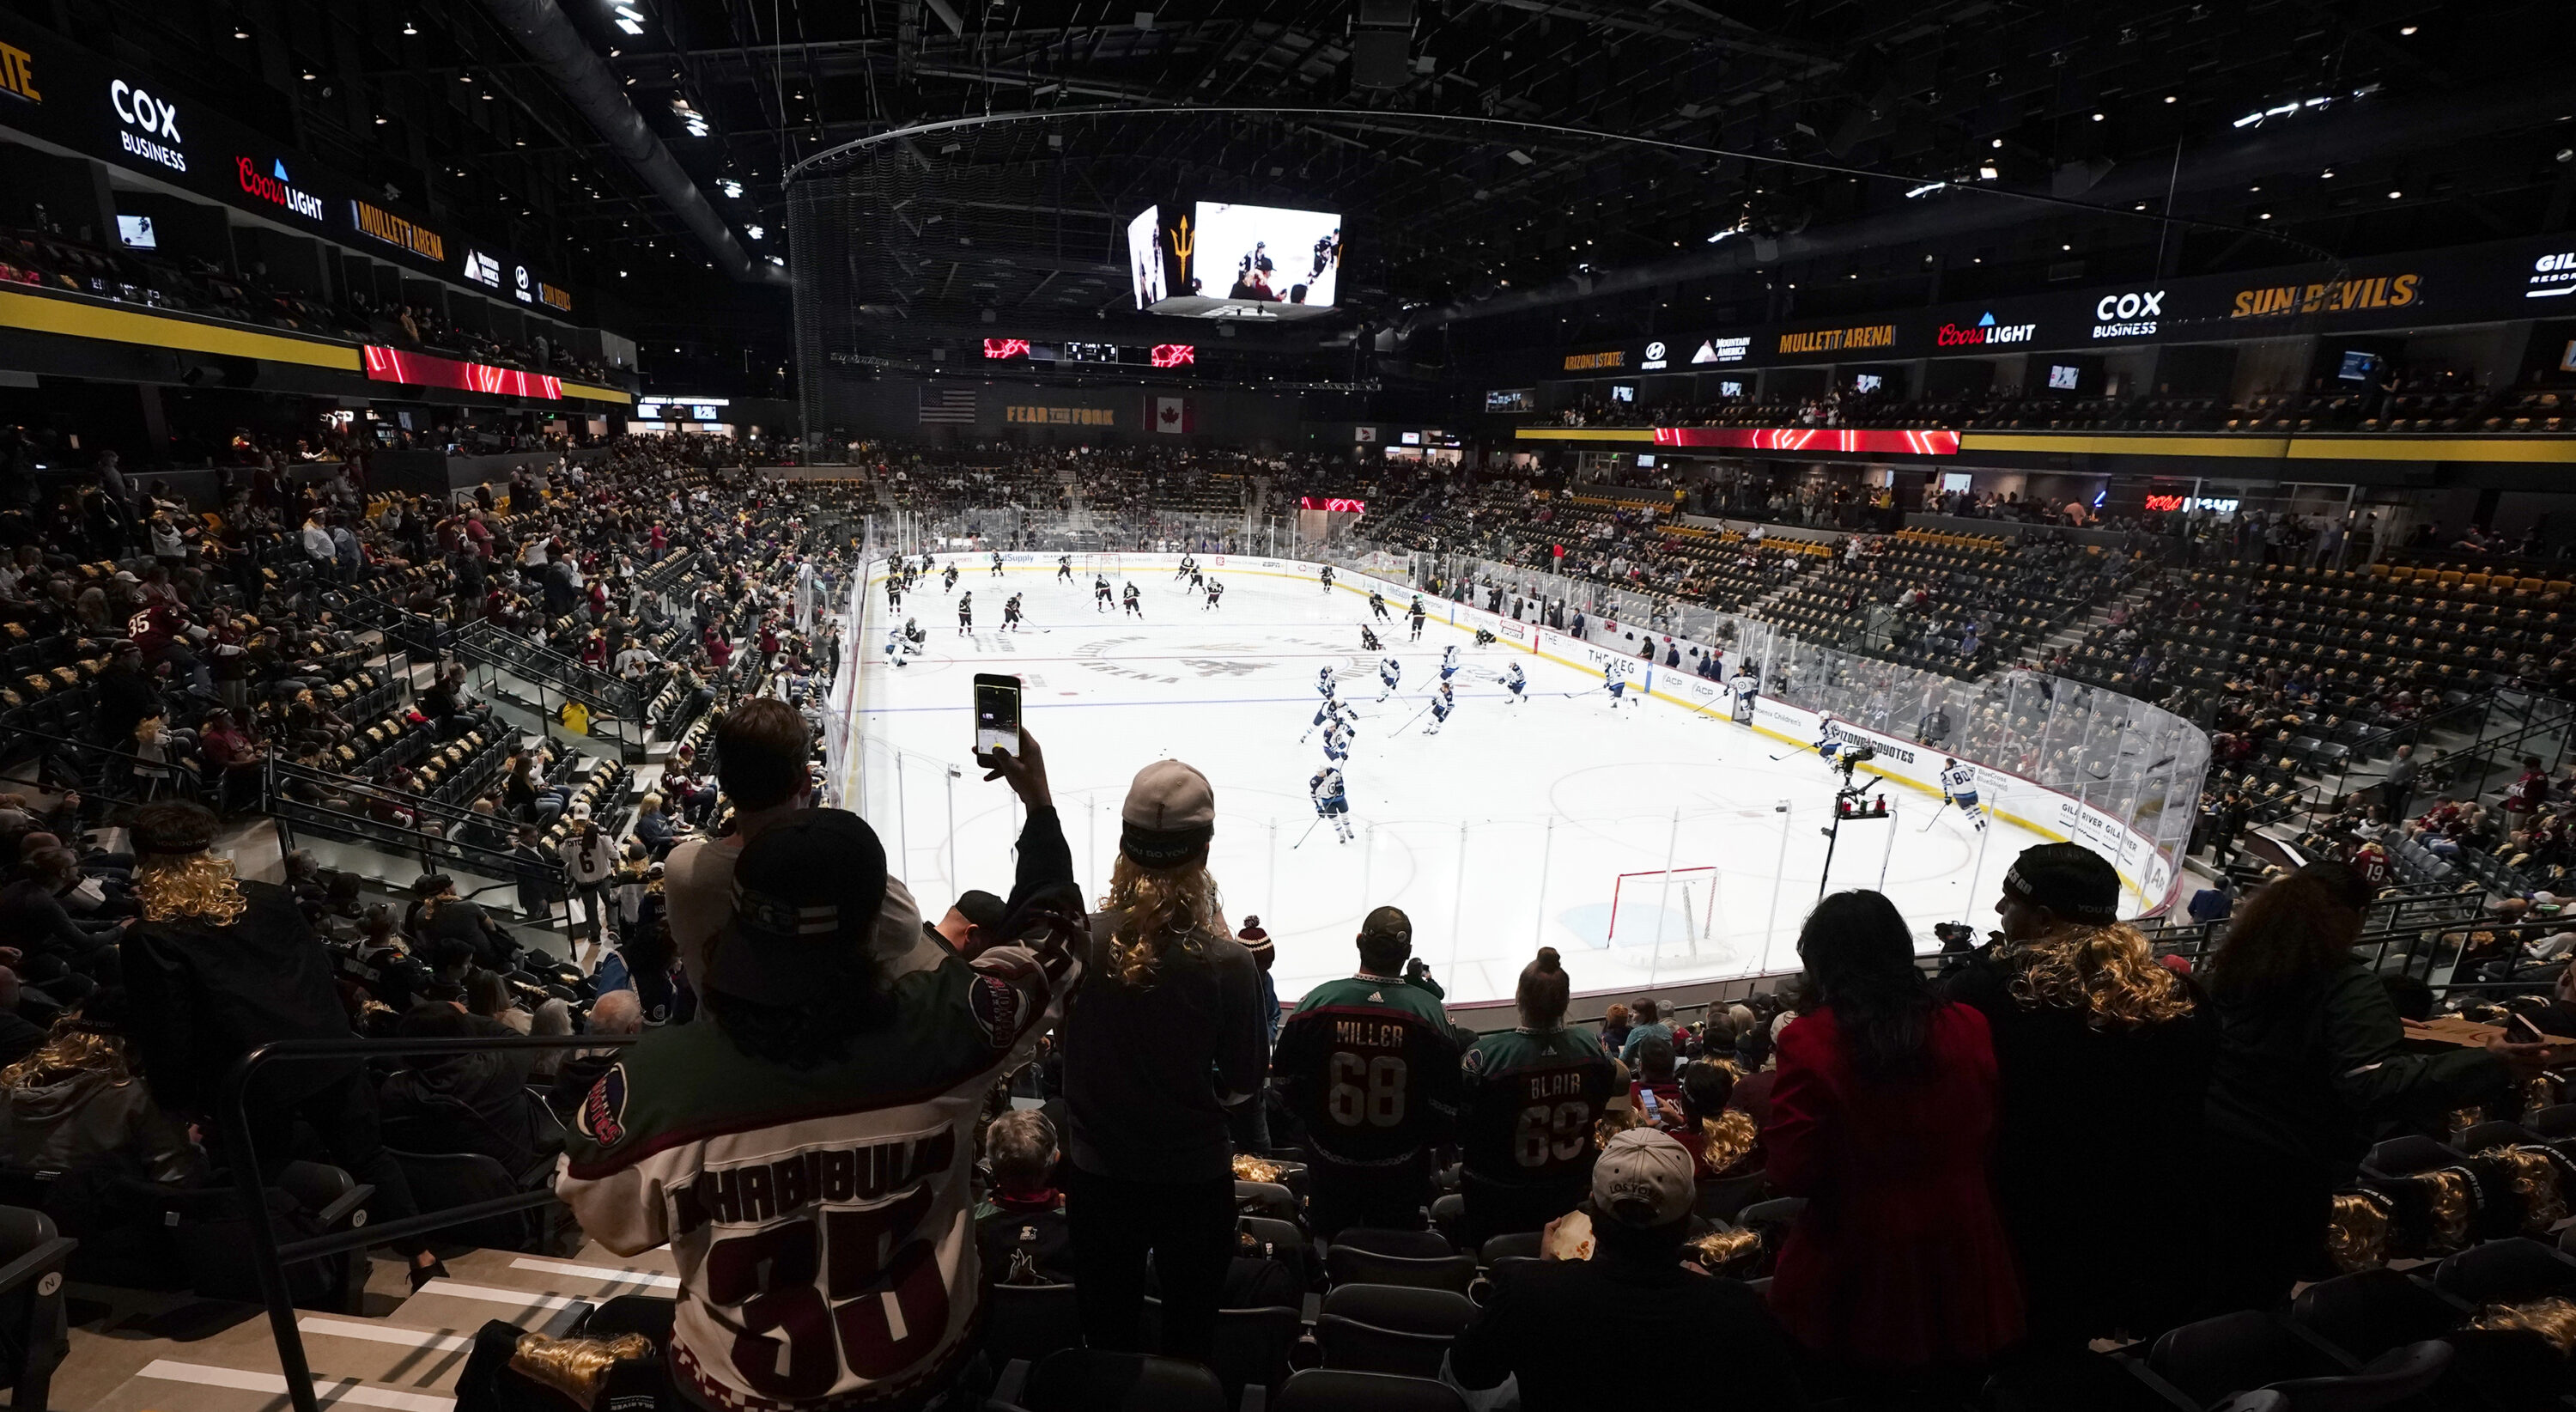 Houston a potential relocation spot for NHLs Arizona Coyotes, hockey insiders say